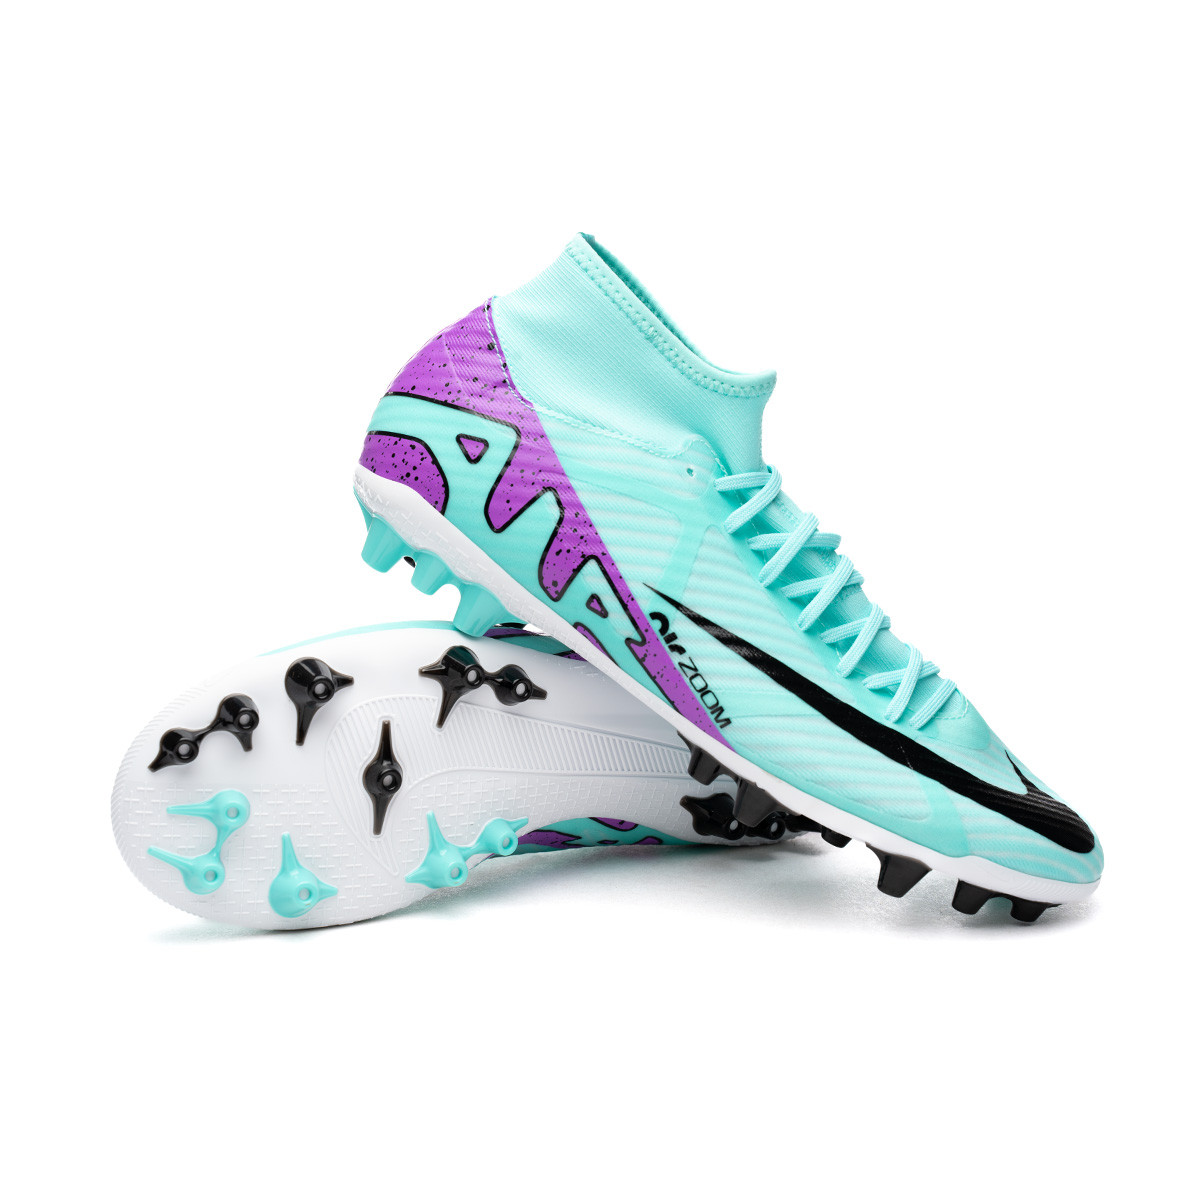 Nike Chaussures Football Salle Zoom Mercurial Superfly IX Academy